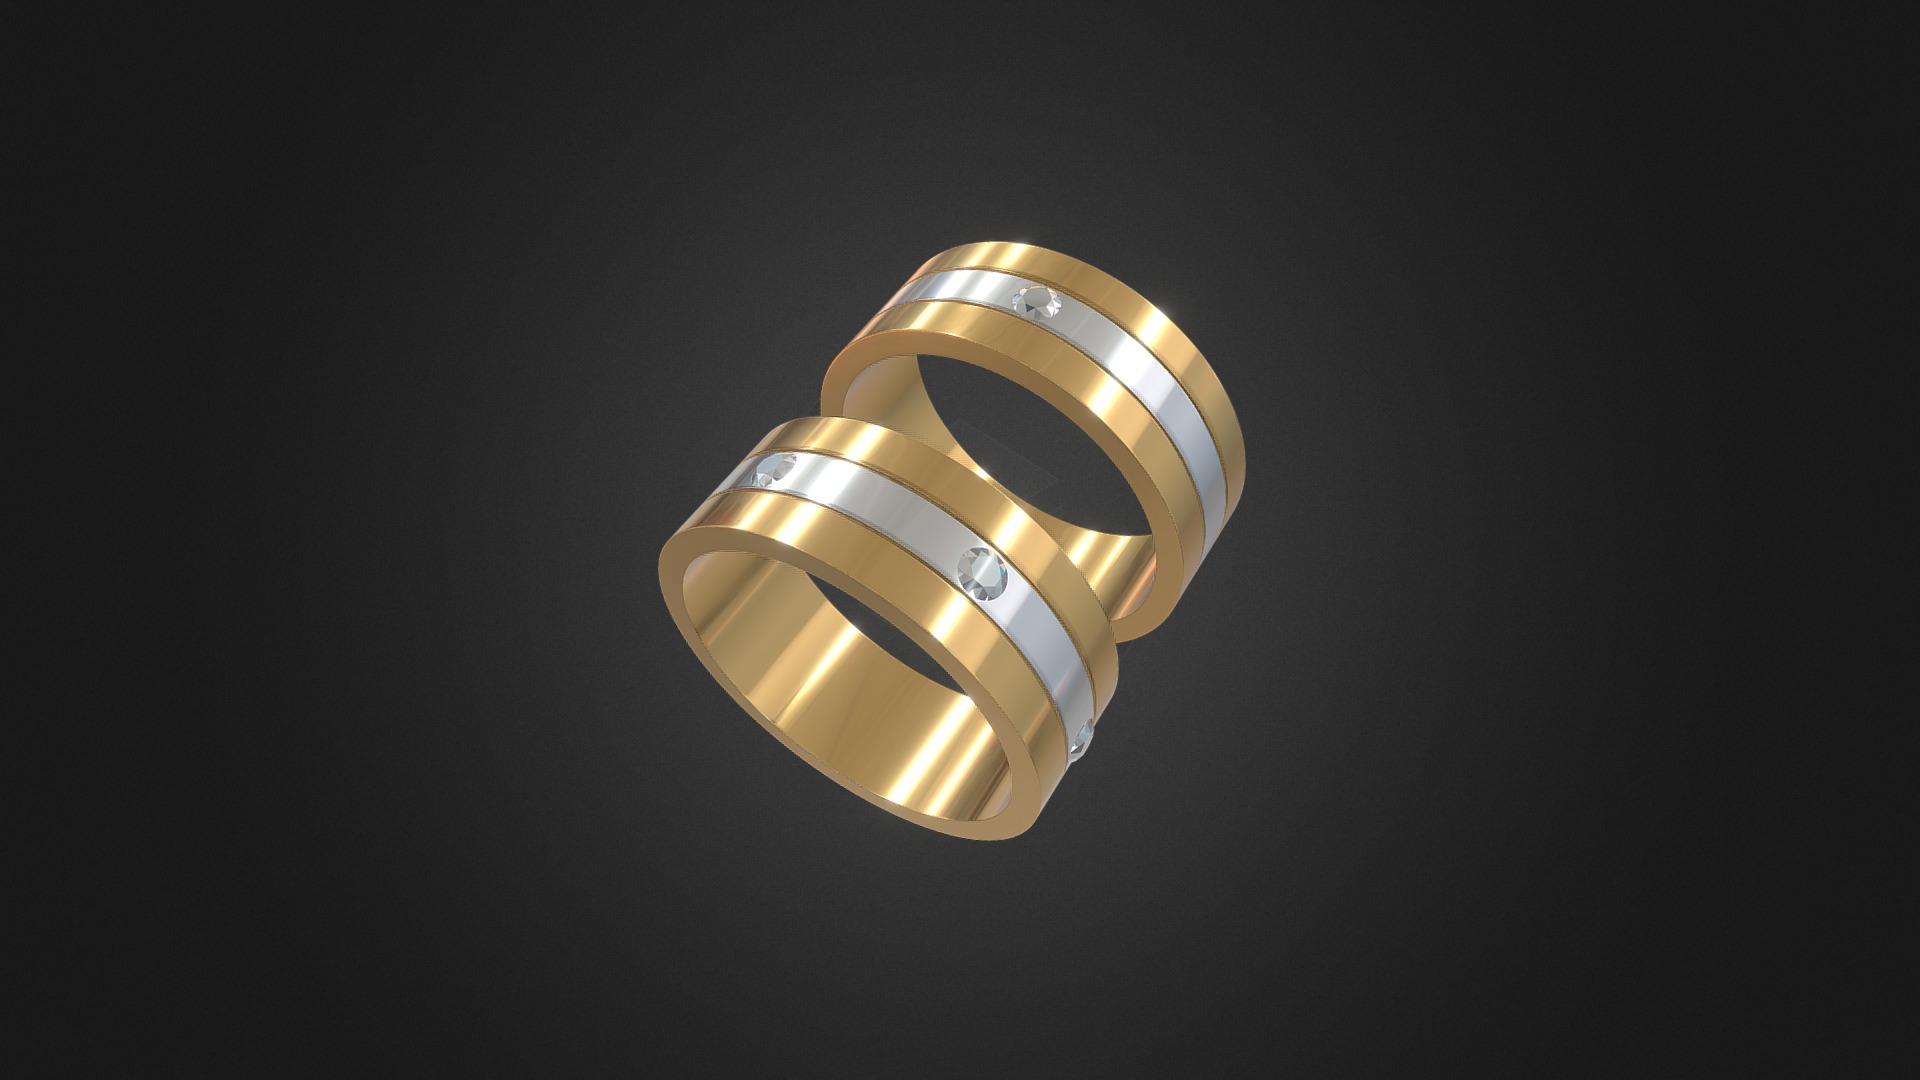 3D model 1050 – Rings - This is a 3D model of the 1050 - Rings. The 3D model is about a gold and silver ring.